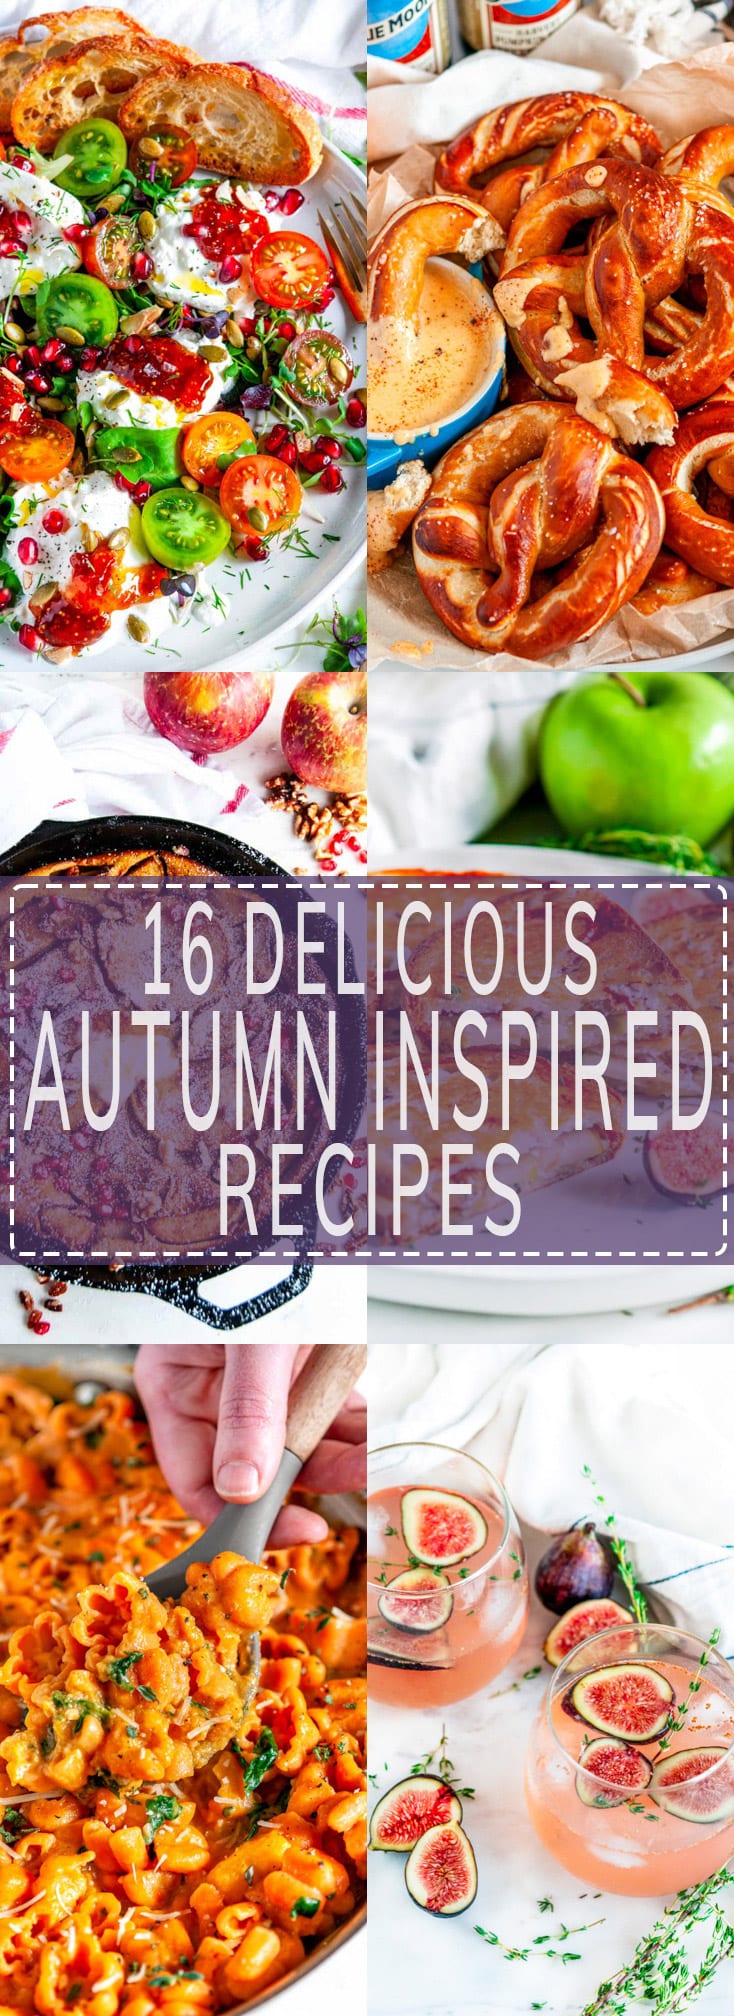 16 Delicious Autumn Inspired Recipes 6 photos long image with purple rectangle